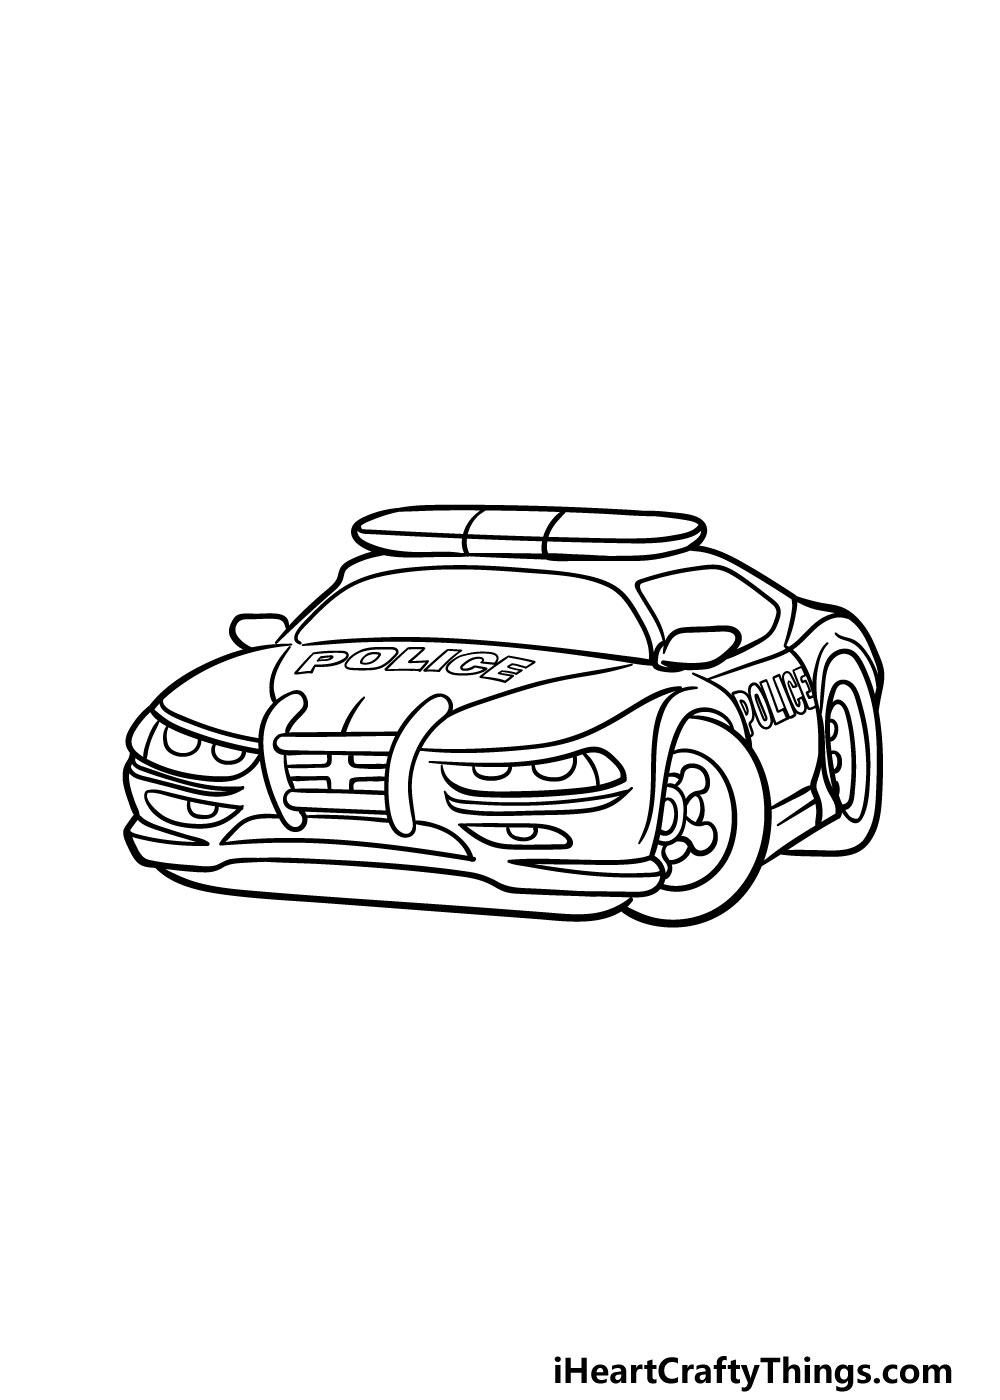 drawing a police car step 5